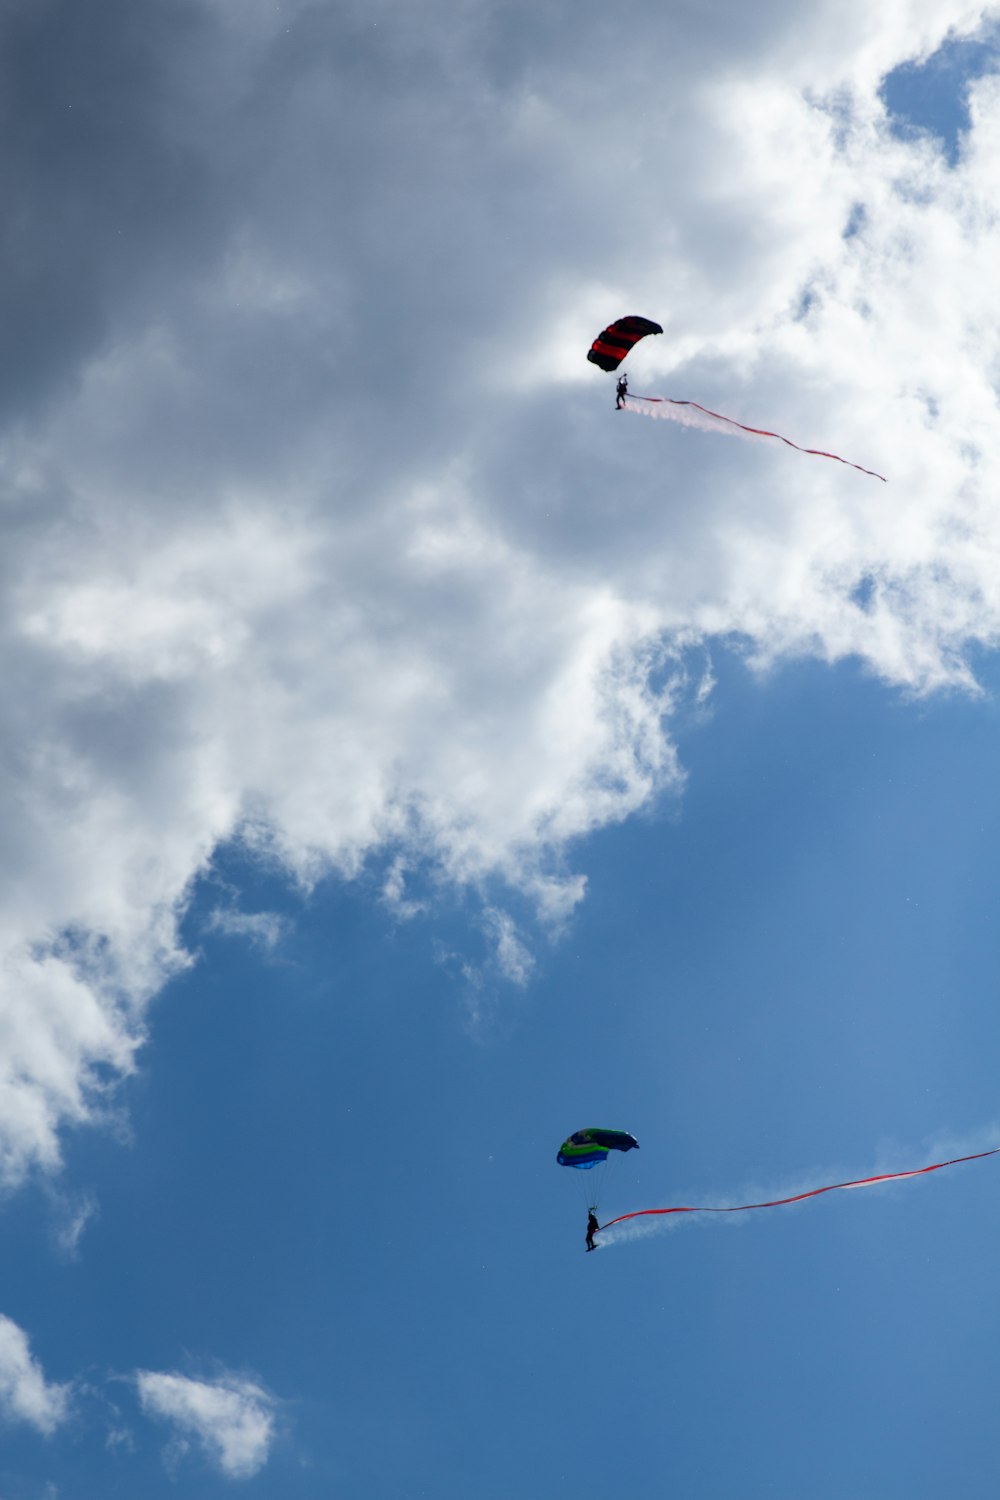 three kites flying in the sky on a cloudy day